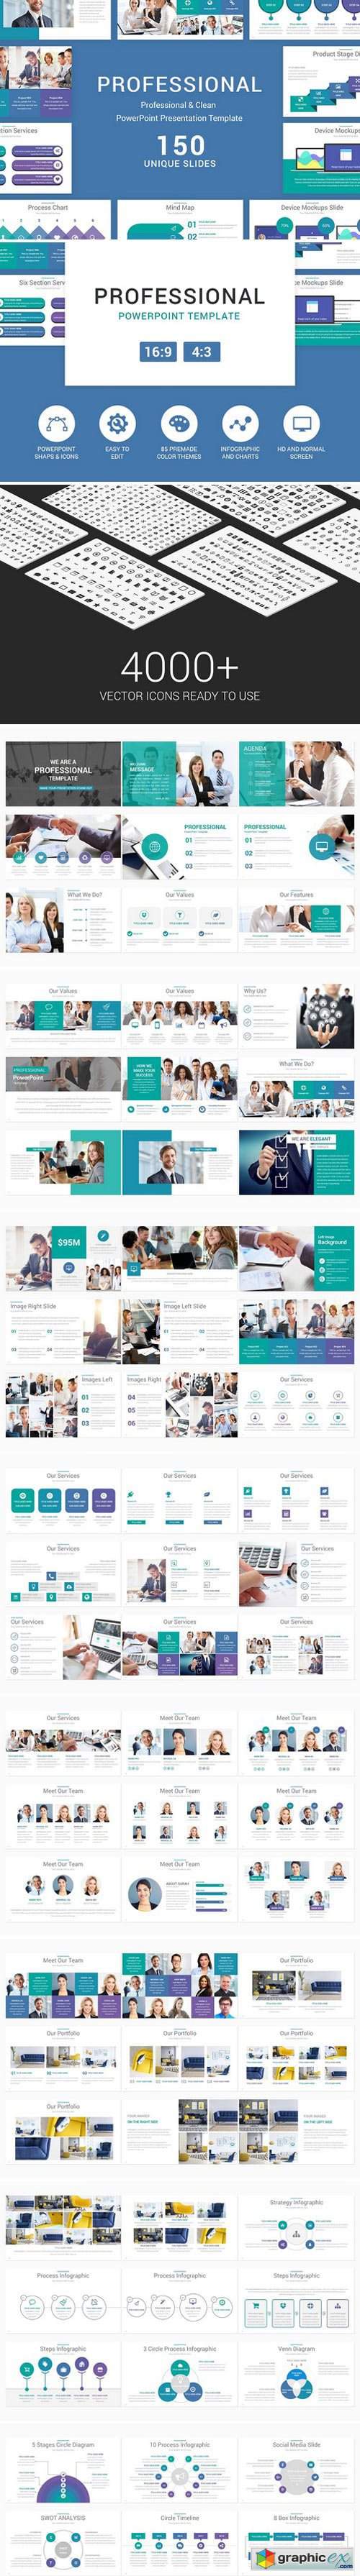 Professional PowerPoint Template 2359803